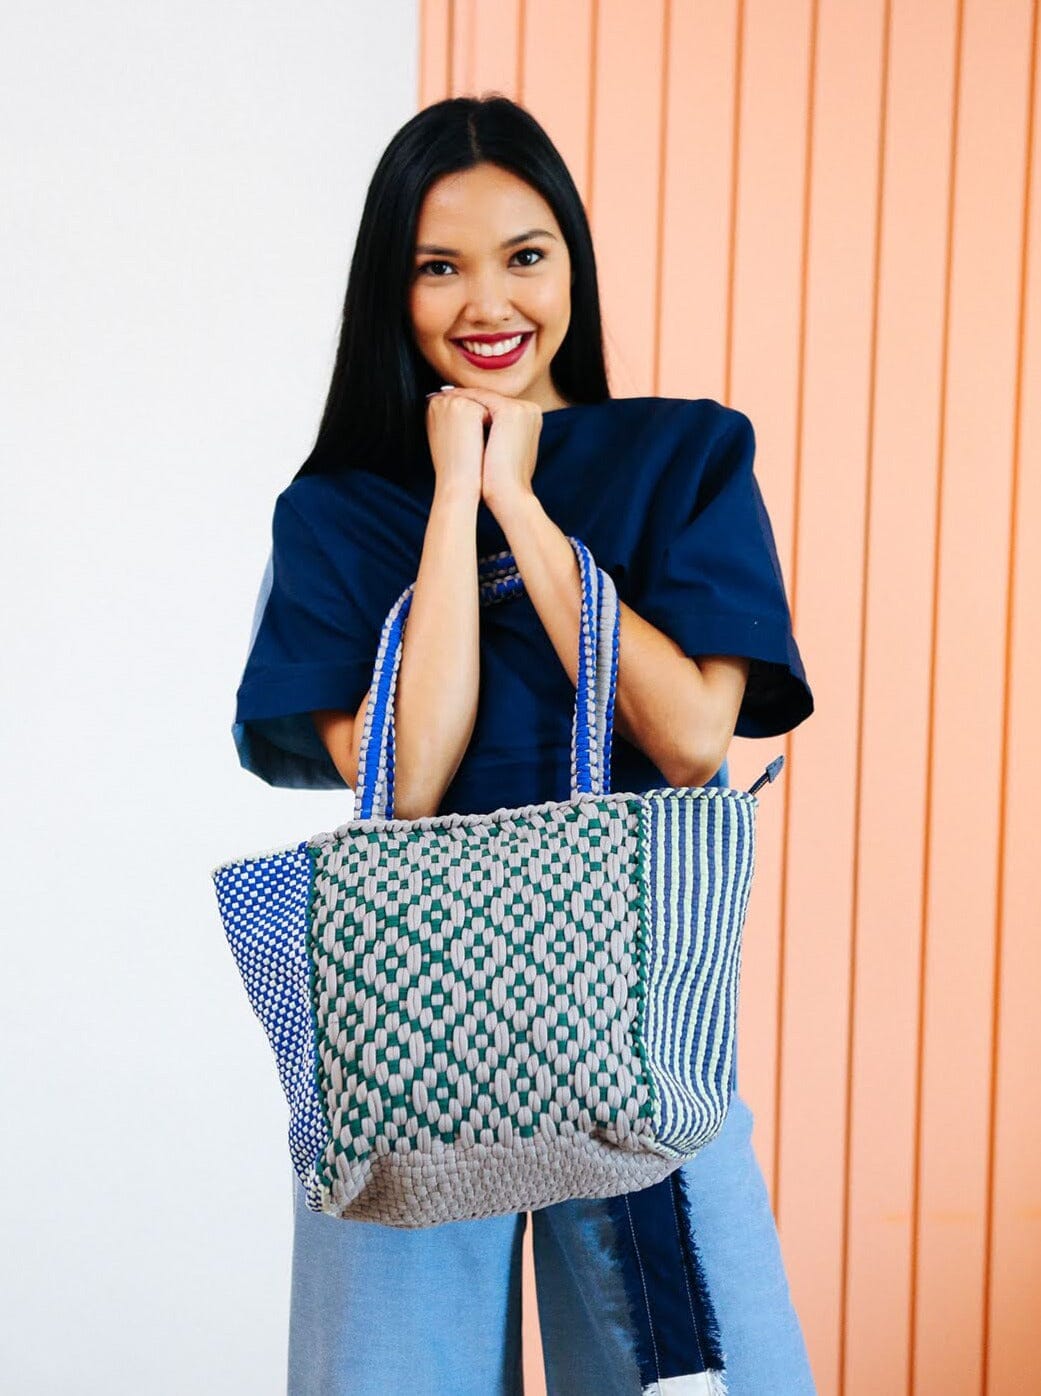 [Ready Today] Multi Weave Tote Large Aurora Fashion Rags2Riches